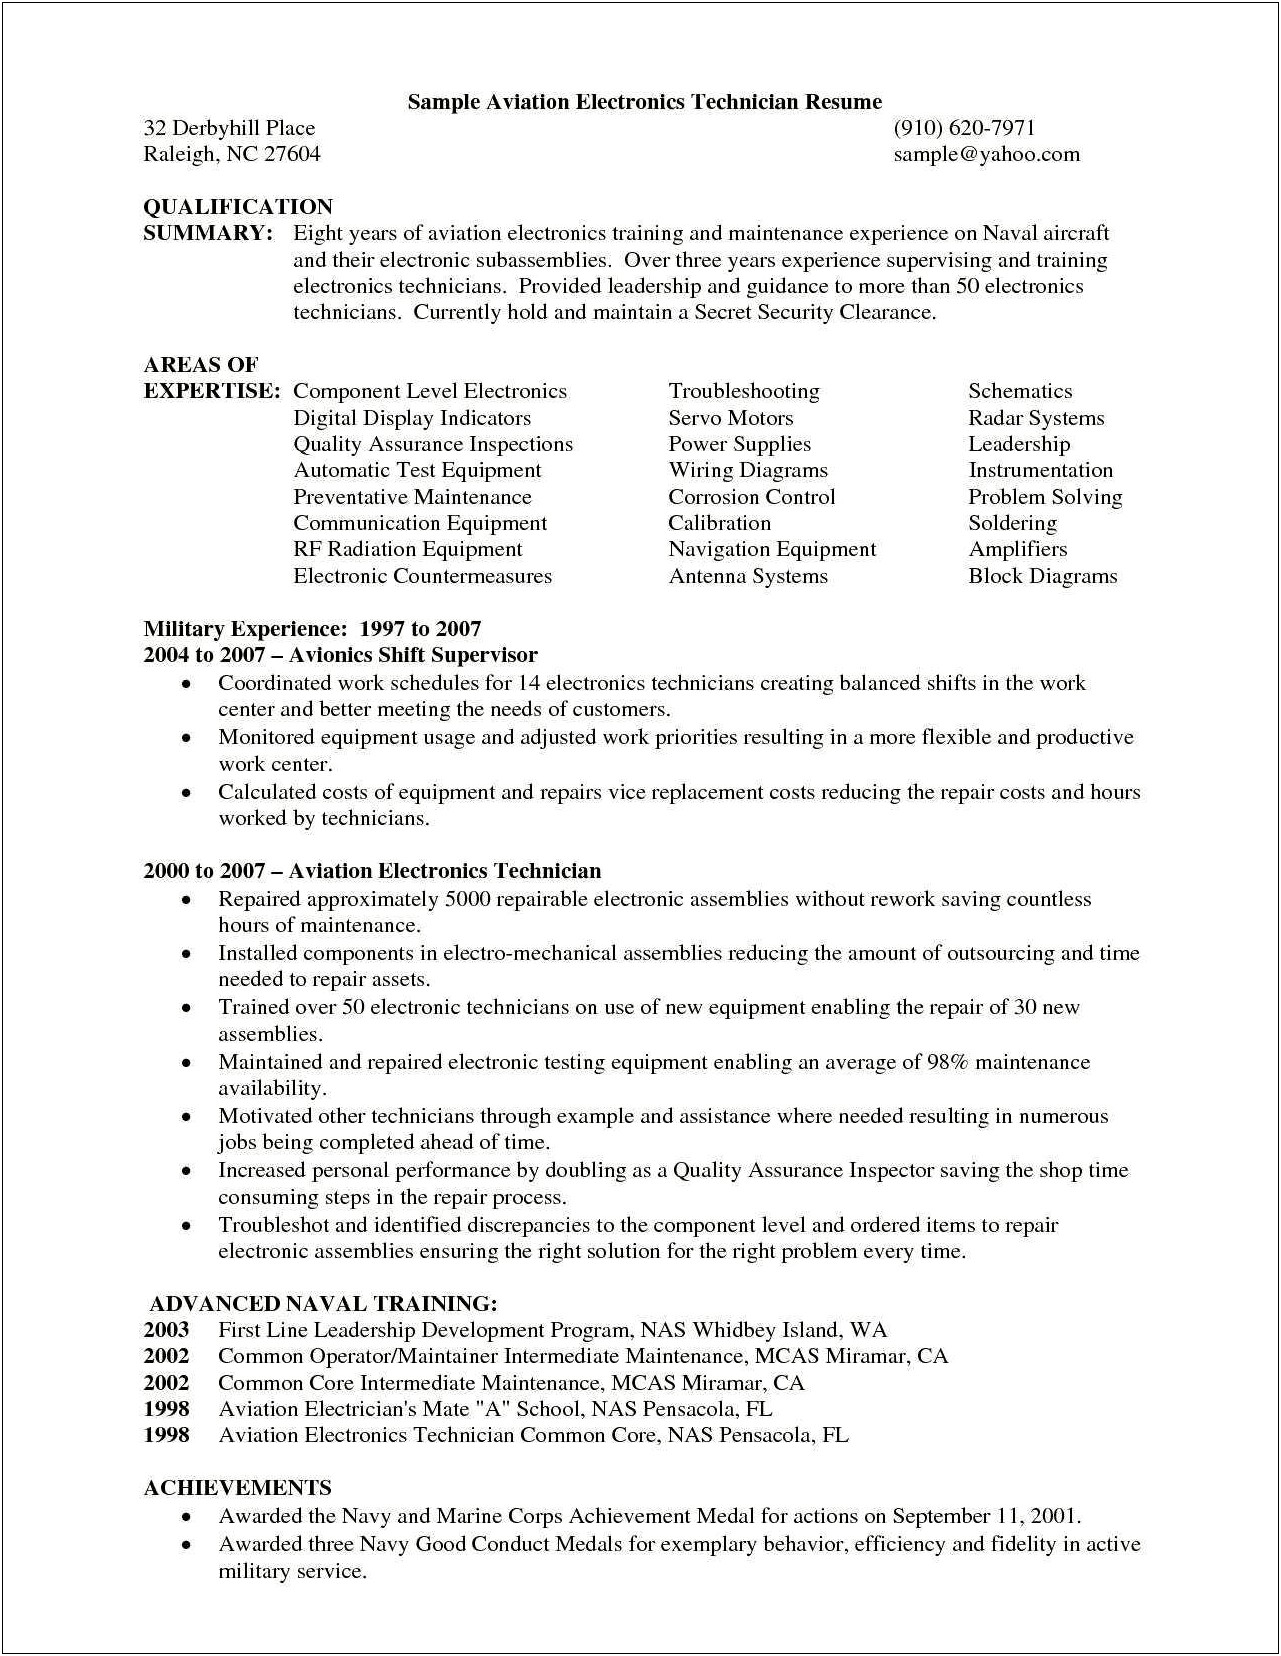 Resume Summary Section For Electronics Technician